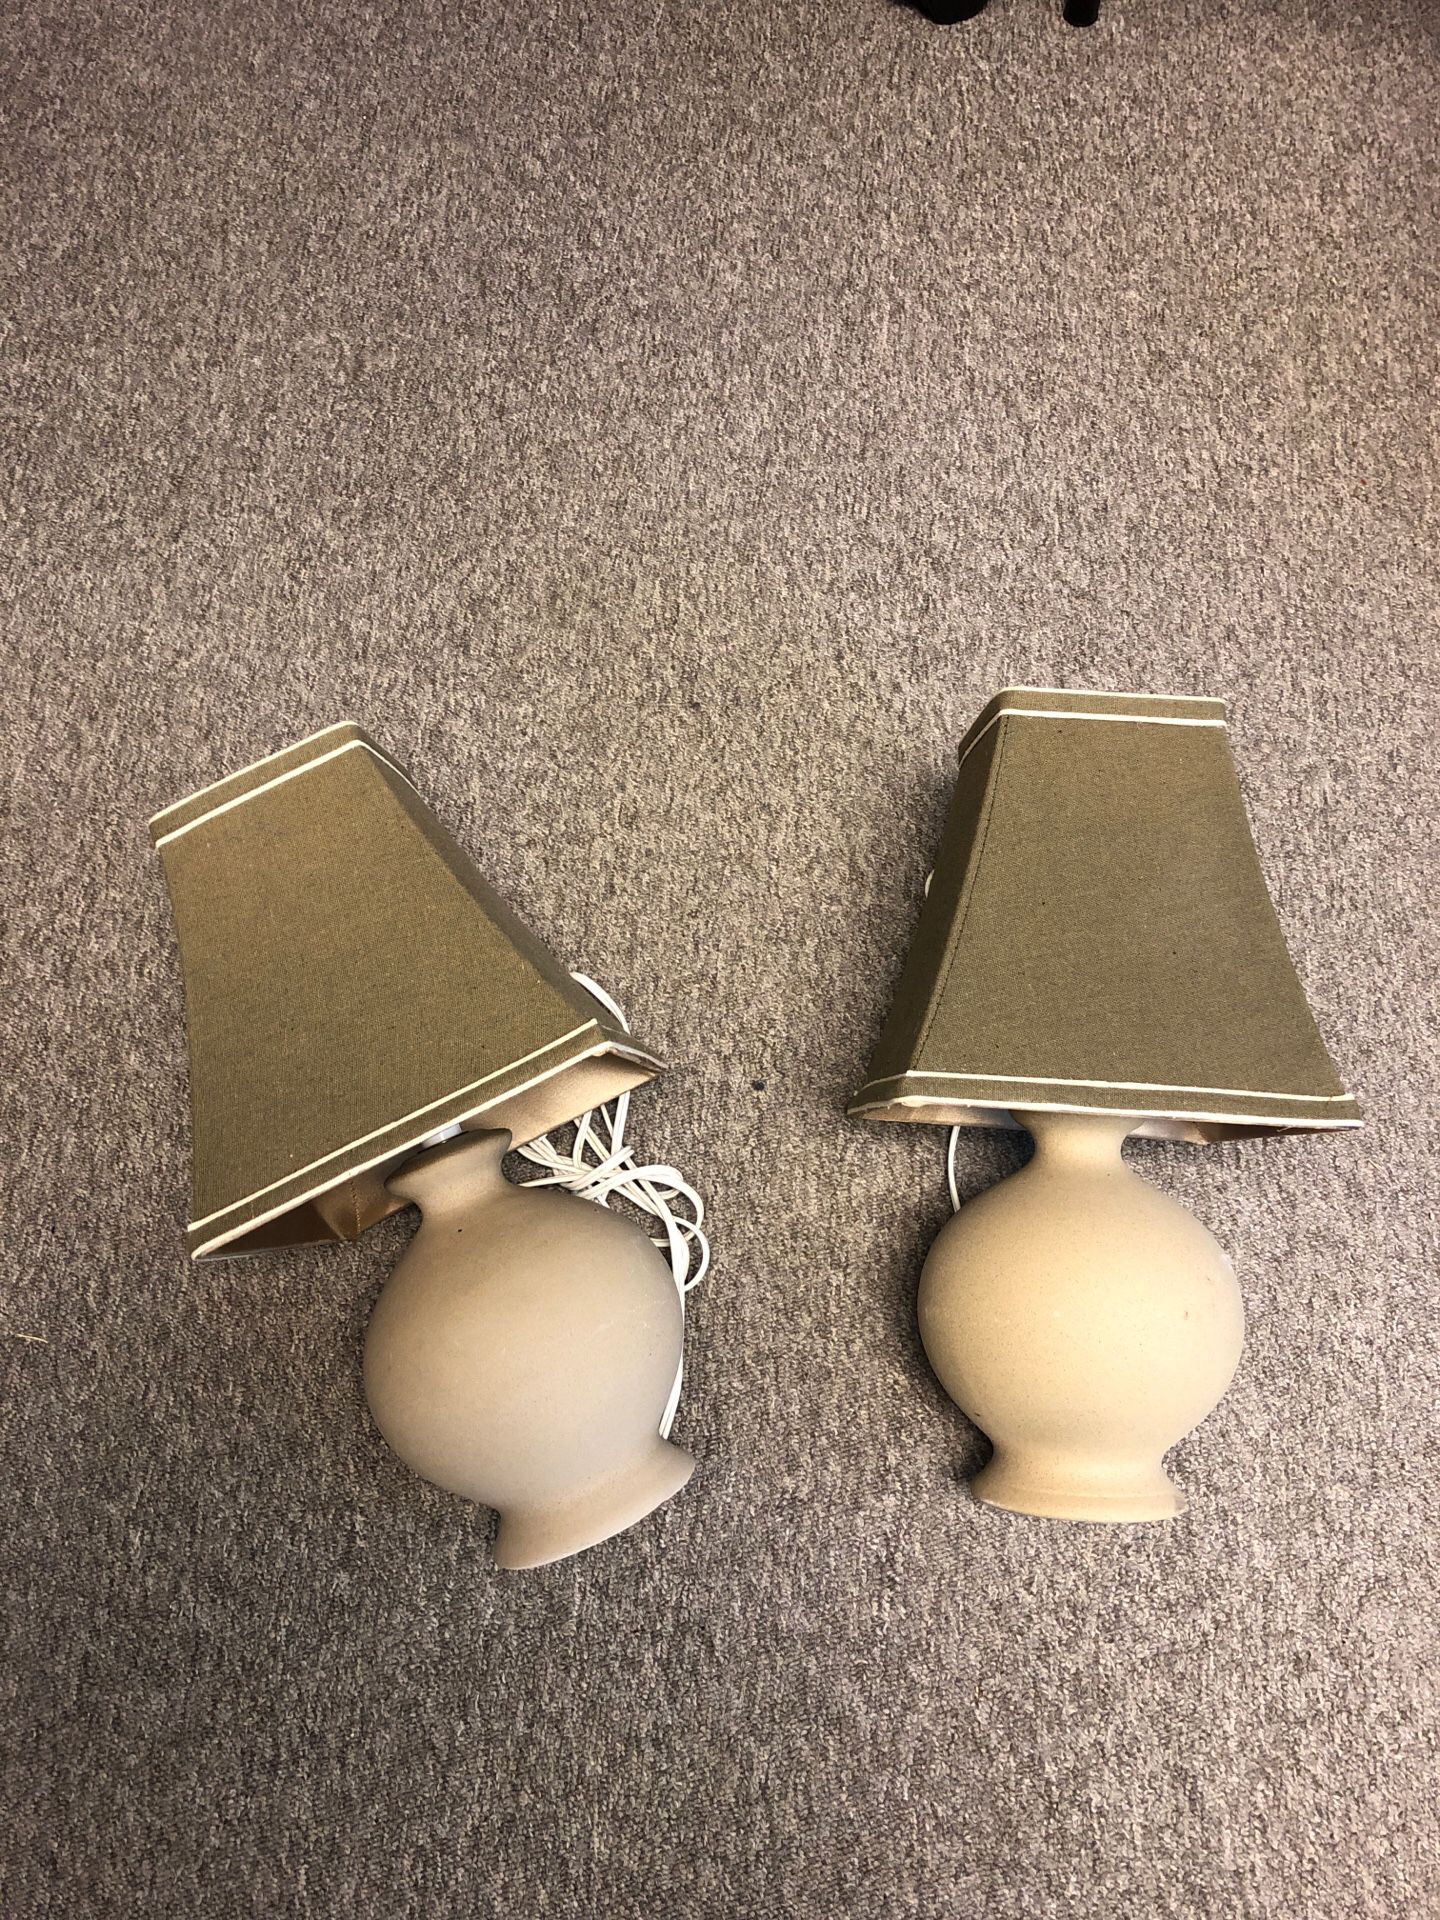 Two Lamps with shades